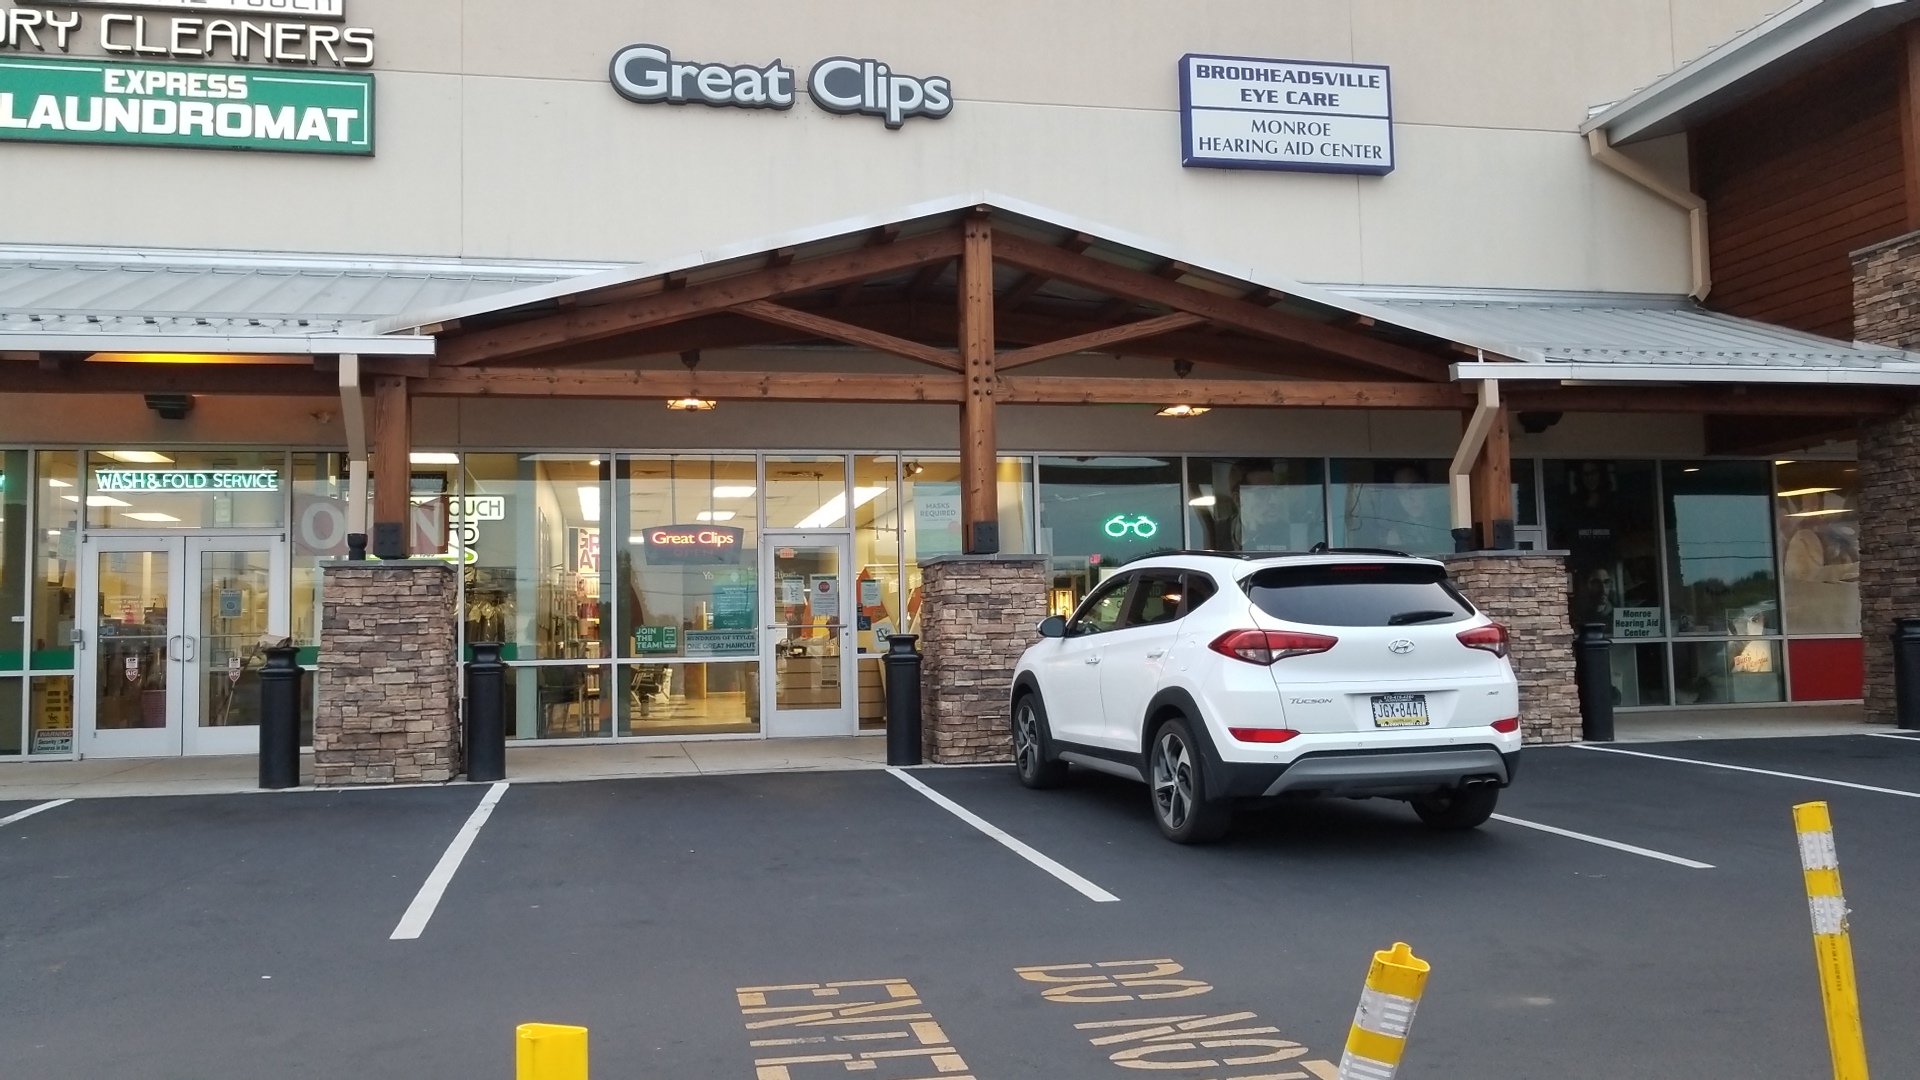 Great Clips 107 Kinsley Dr Ste 1B, Brodheadsville Pennsylvania 18322